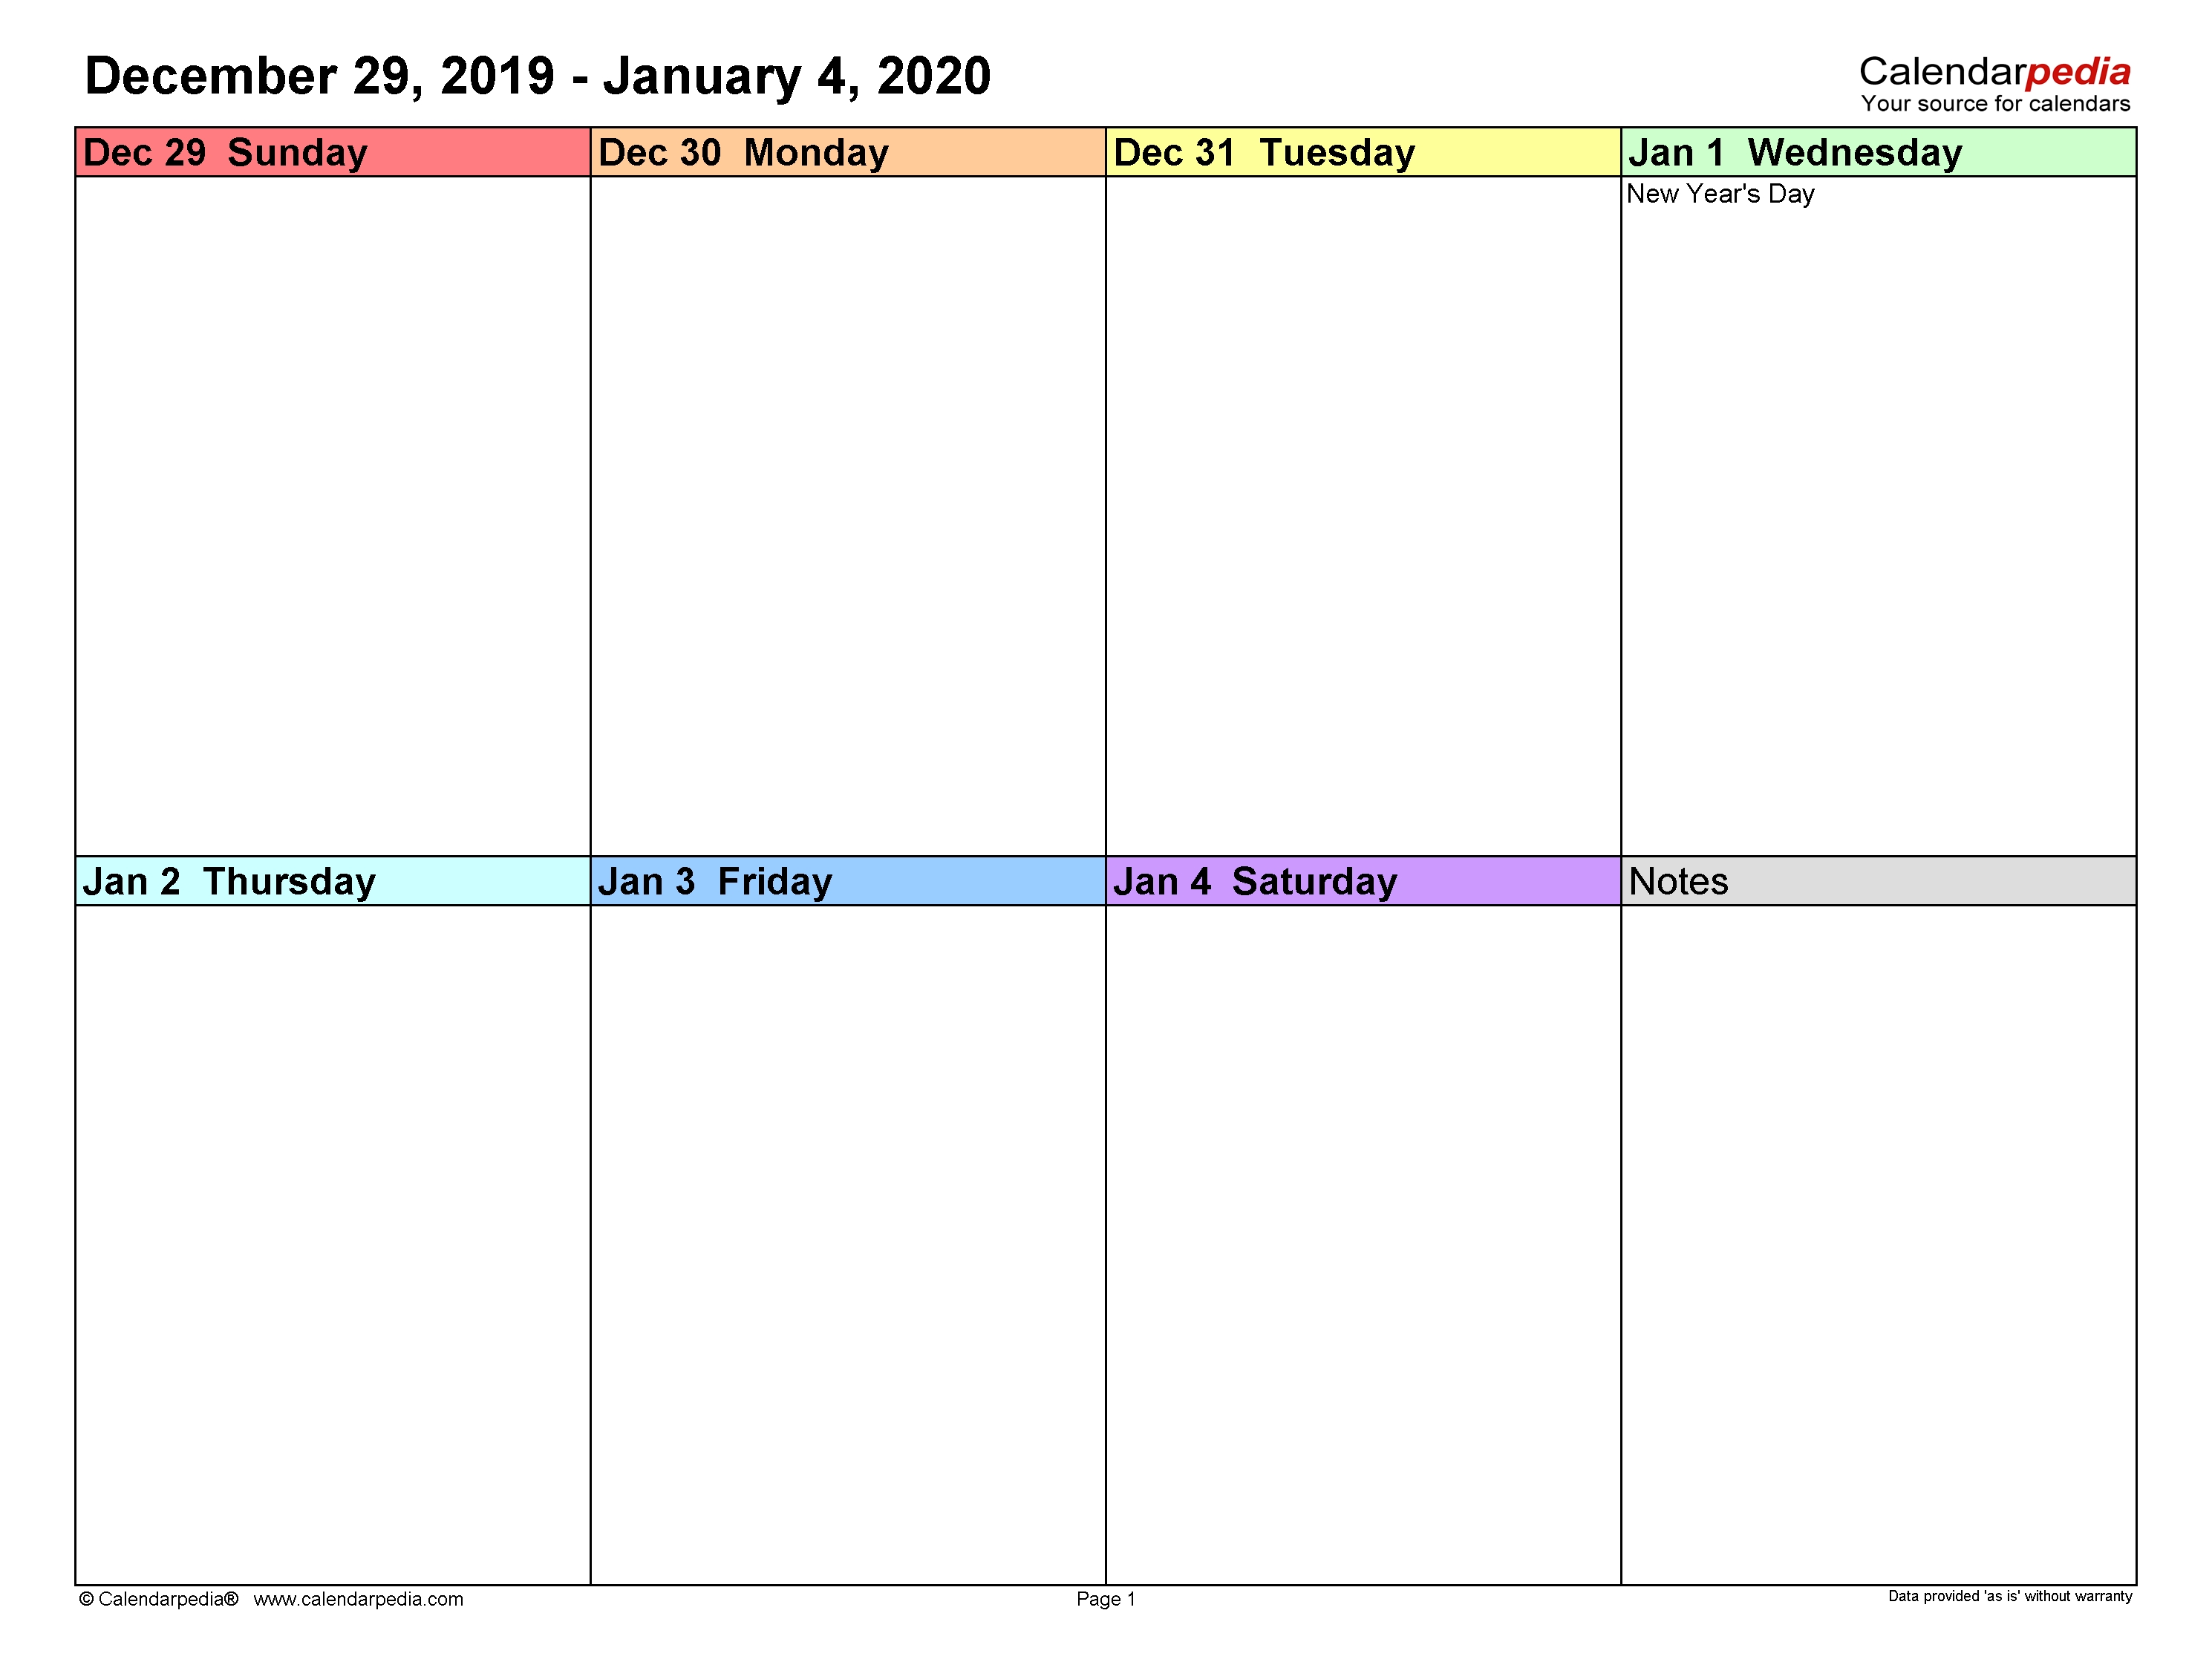 Weekly Calendars 2020 For Word - 12 Free Printable Templates 2 Day Calendar Template